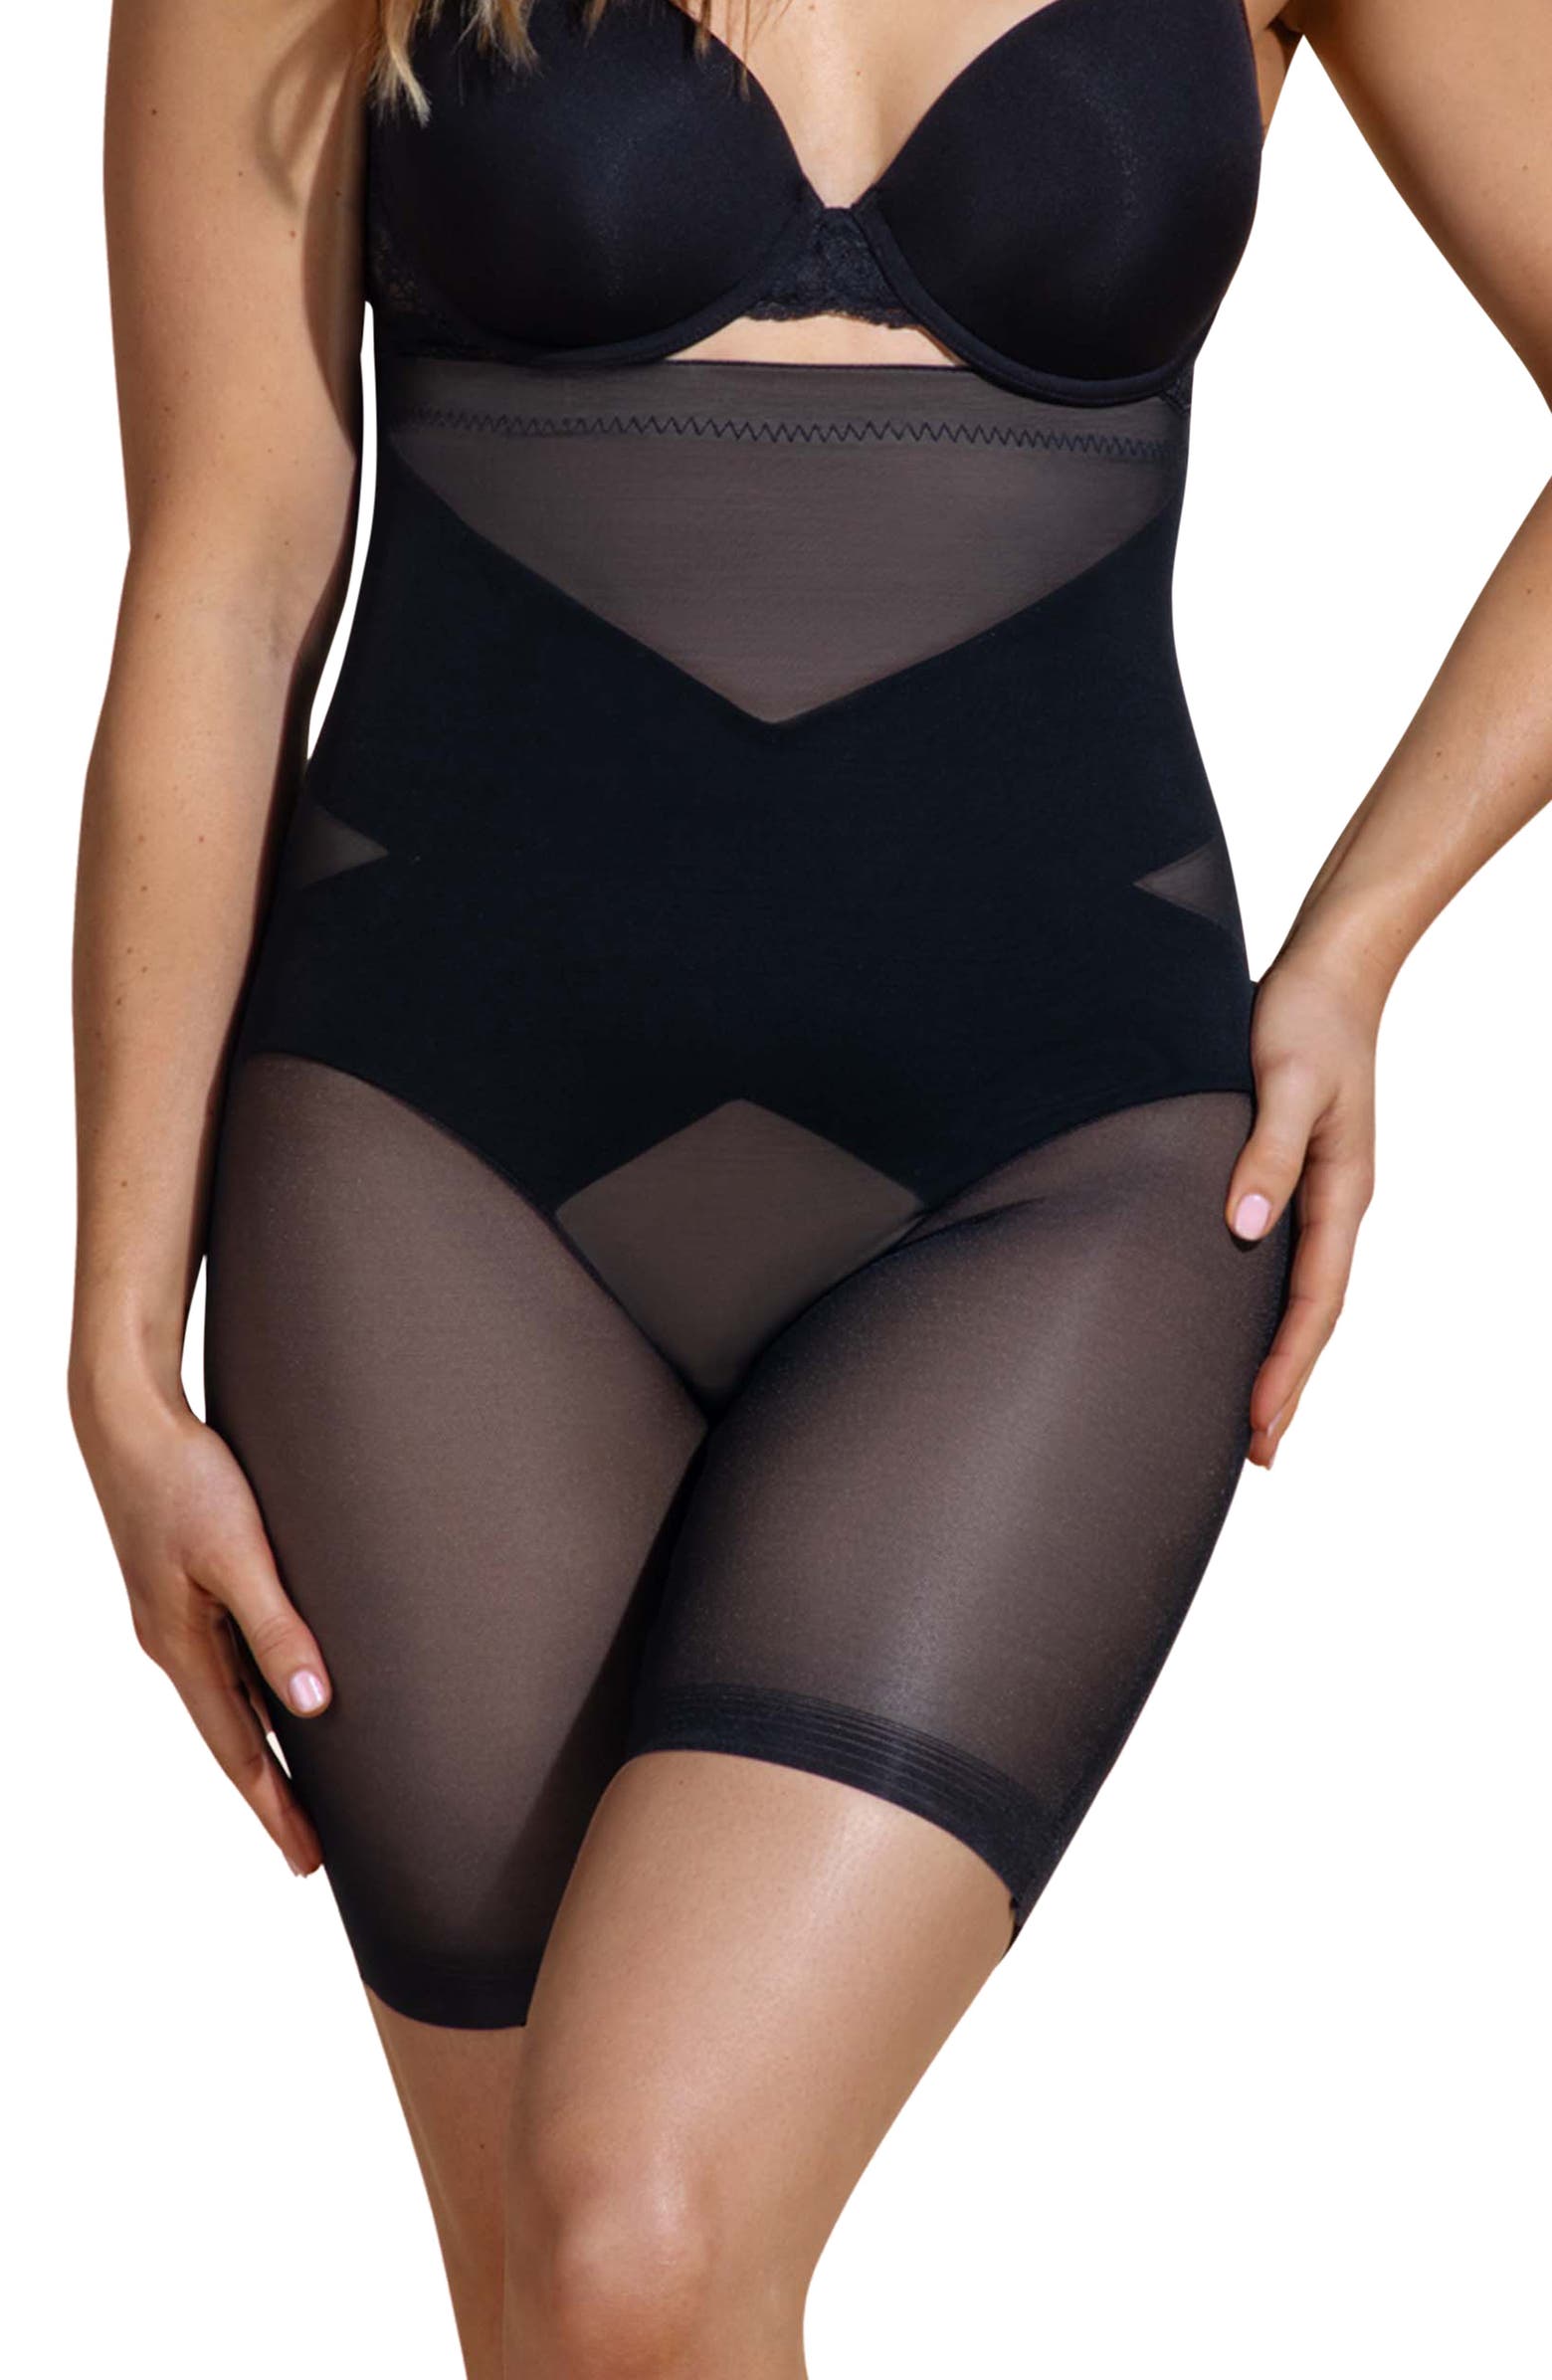 The best shapewear for your personal comfort and style - Good